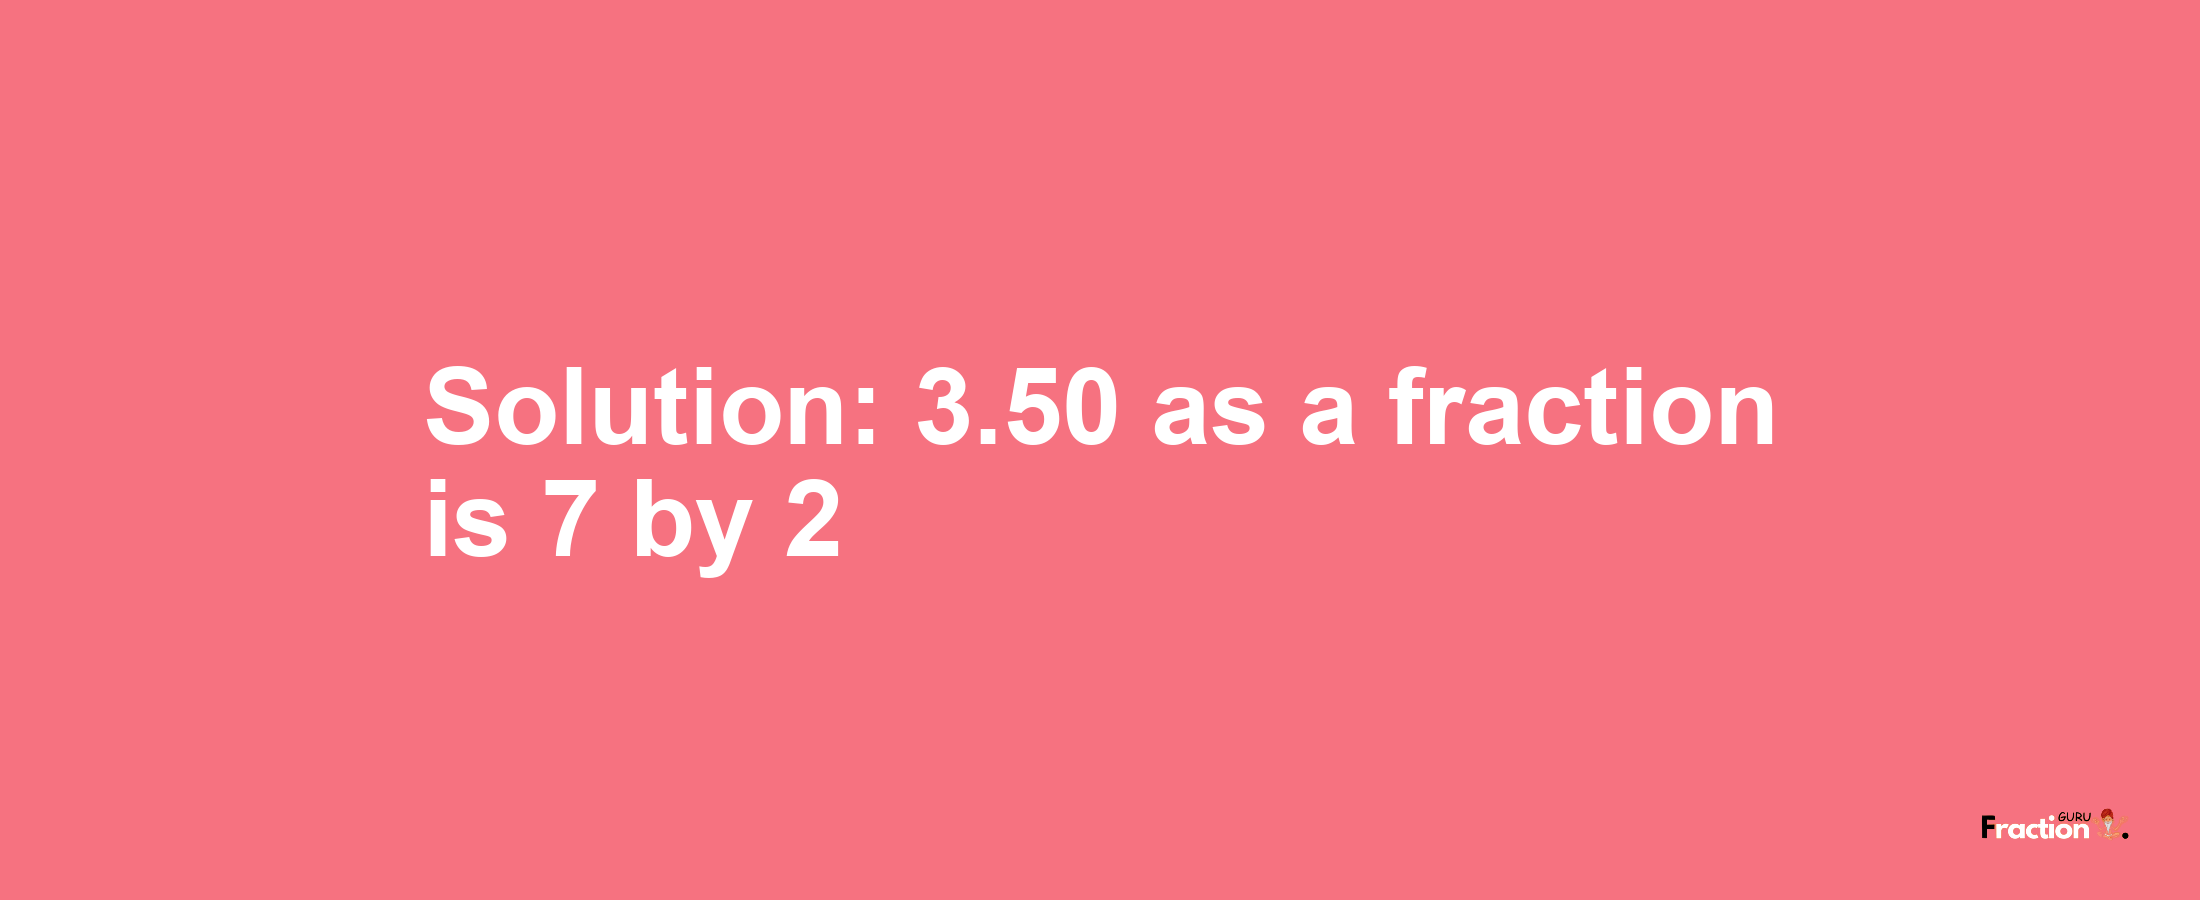 Solution:3.50 as a fraction is 7/2